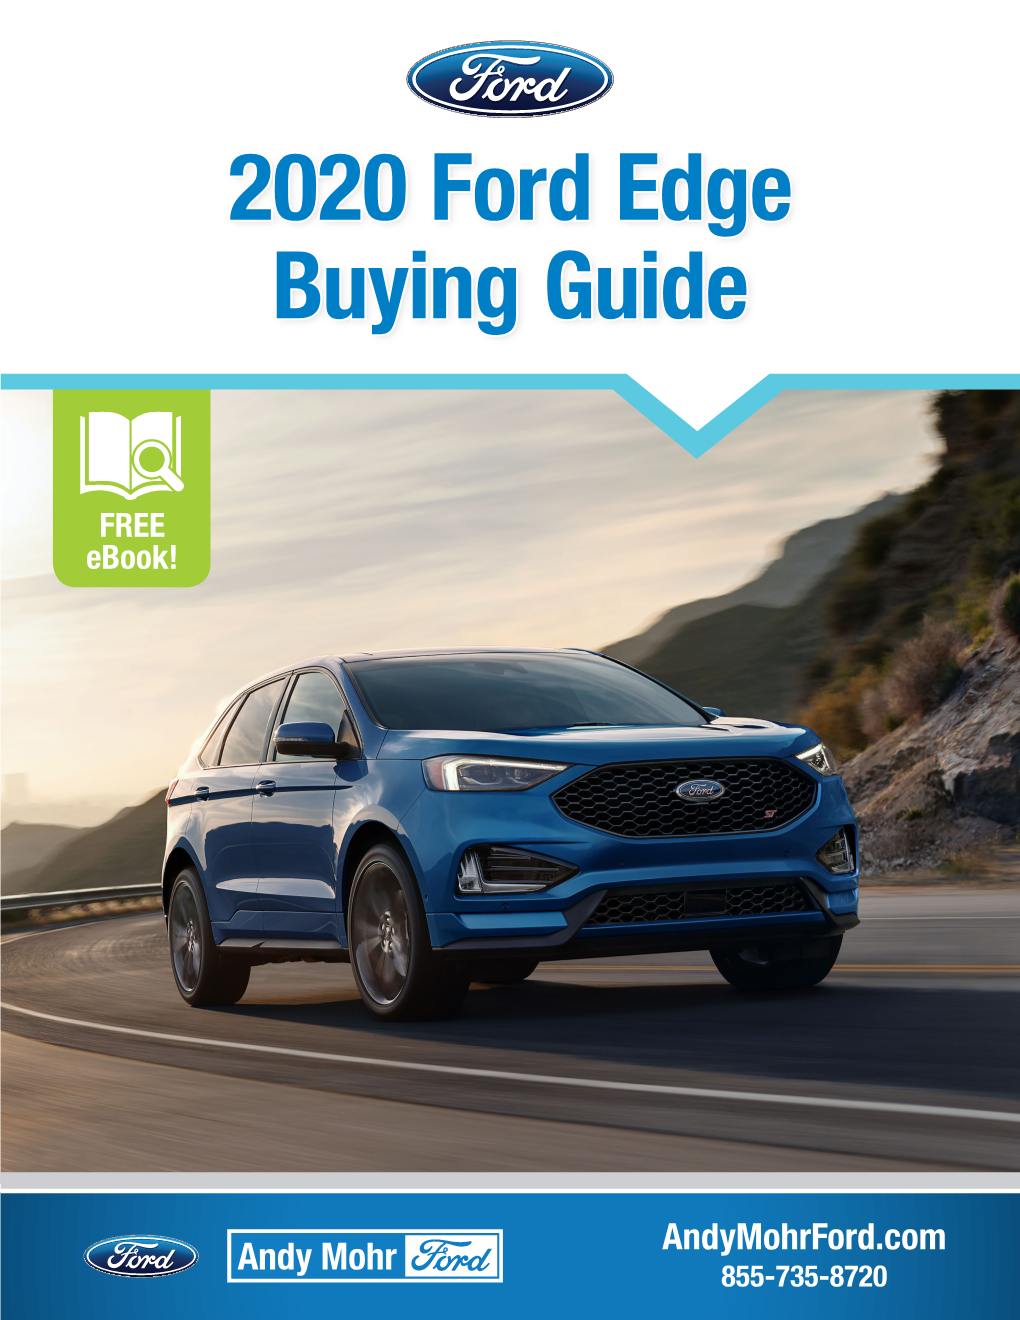 2020 Ford Edge Buying Guide